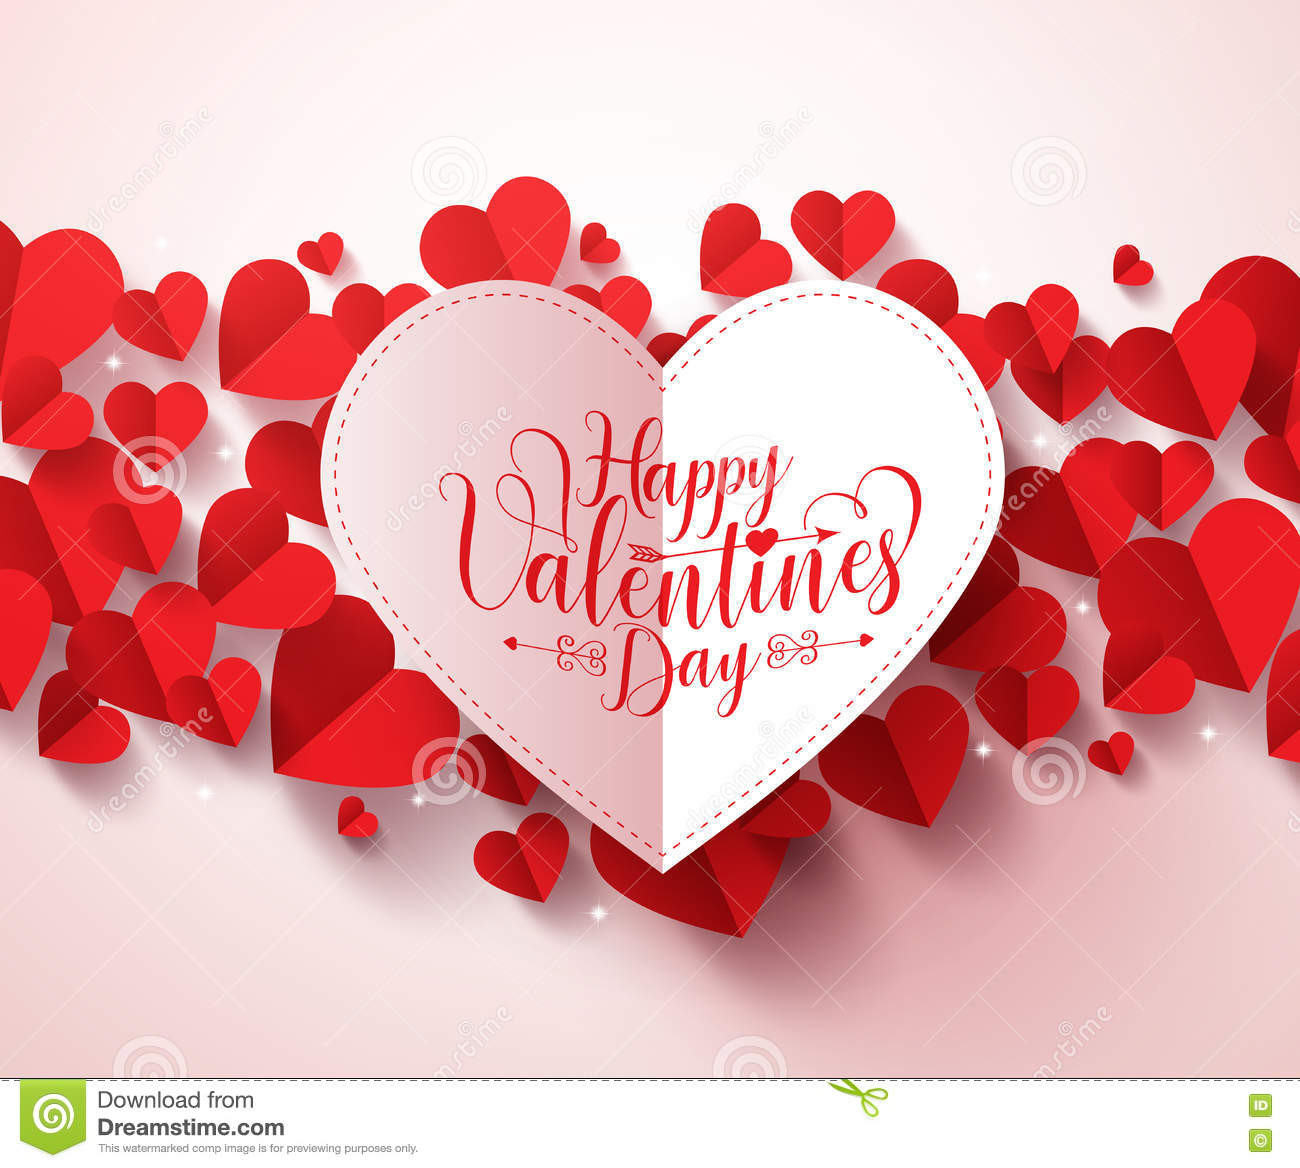 Valentines Day Design
 Valentines Greetings Card Design In White Color With Happy